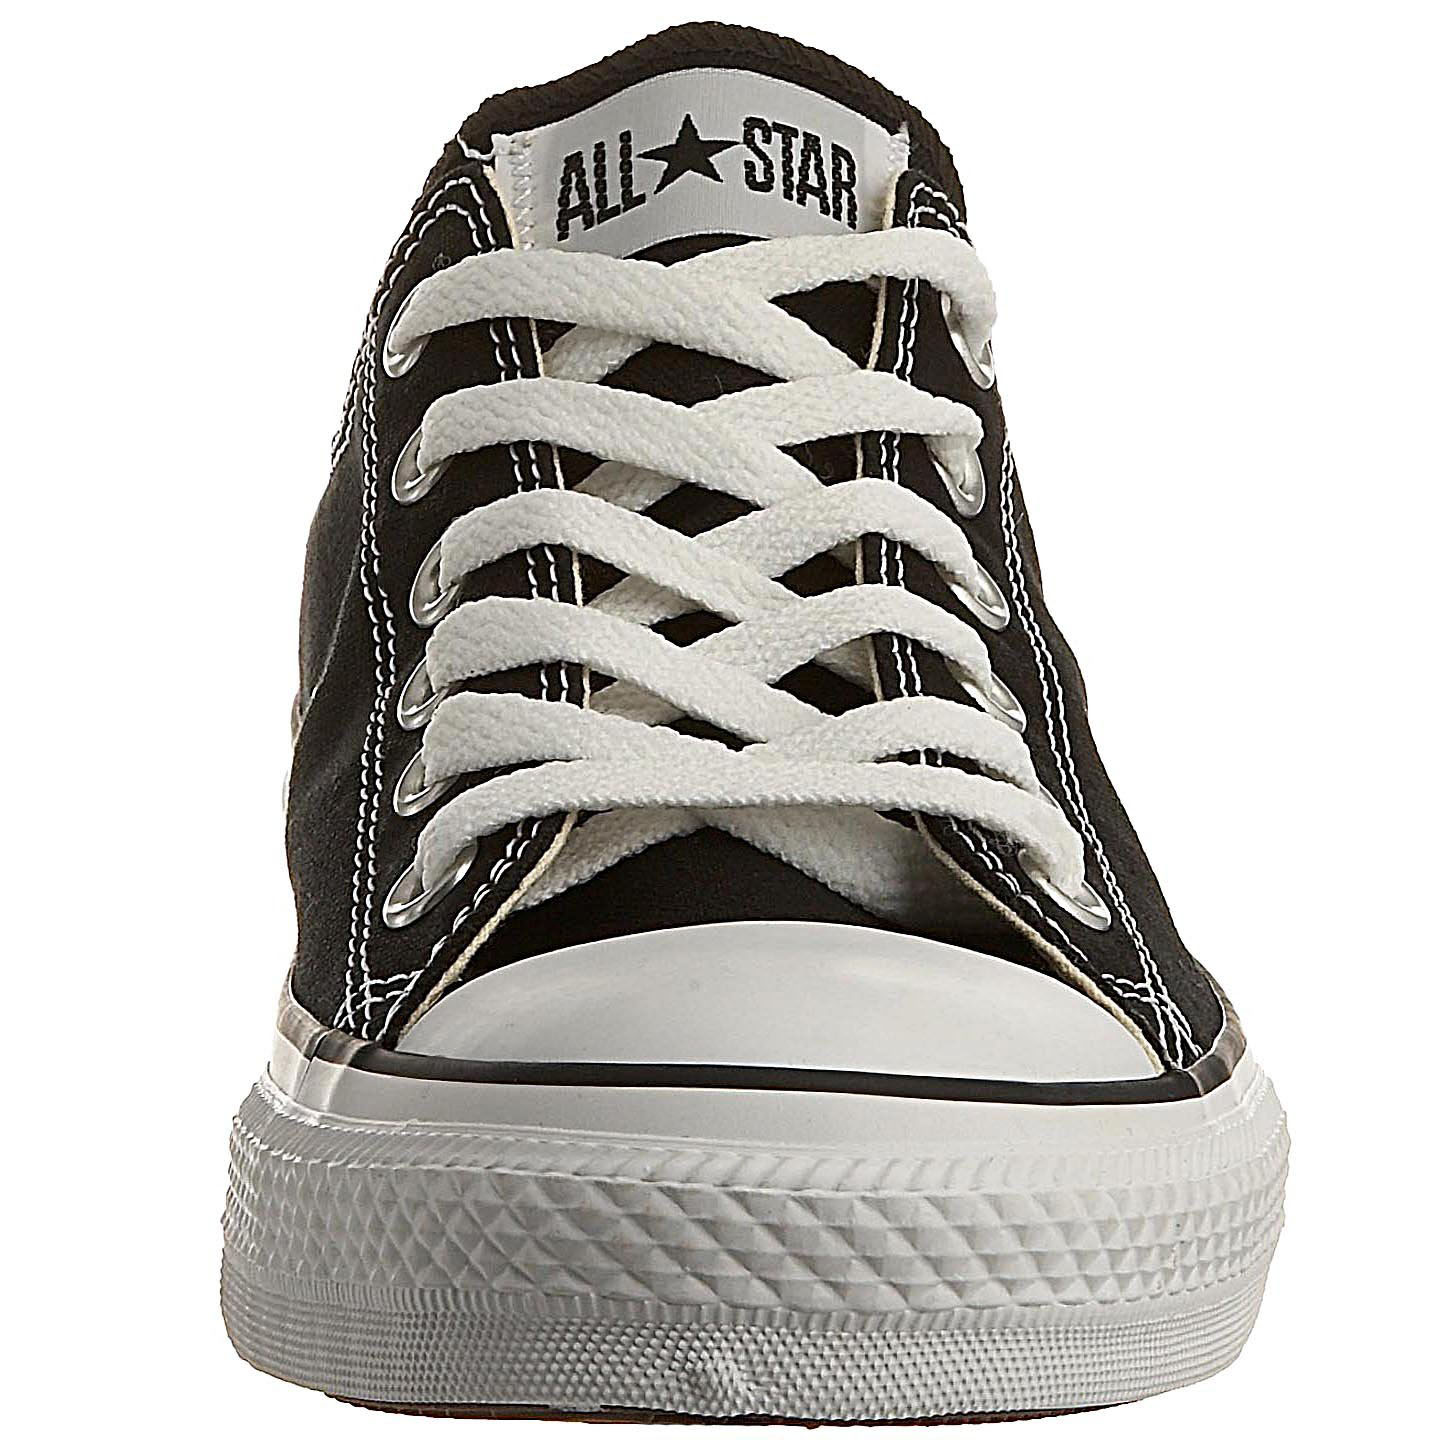 Converse Kids's CONVERSE CHUCK TAYLOR ALL STAR YTHS OXFORD BASKETBALL SHOES - image 2 of 7